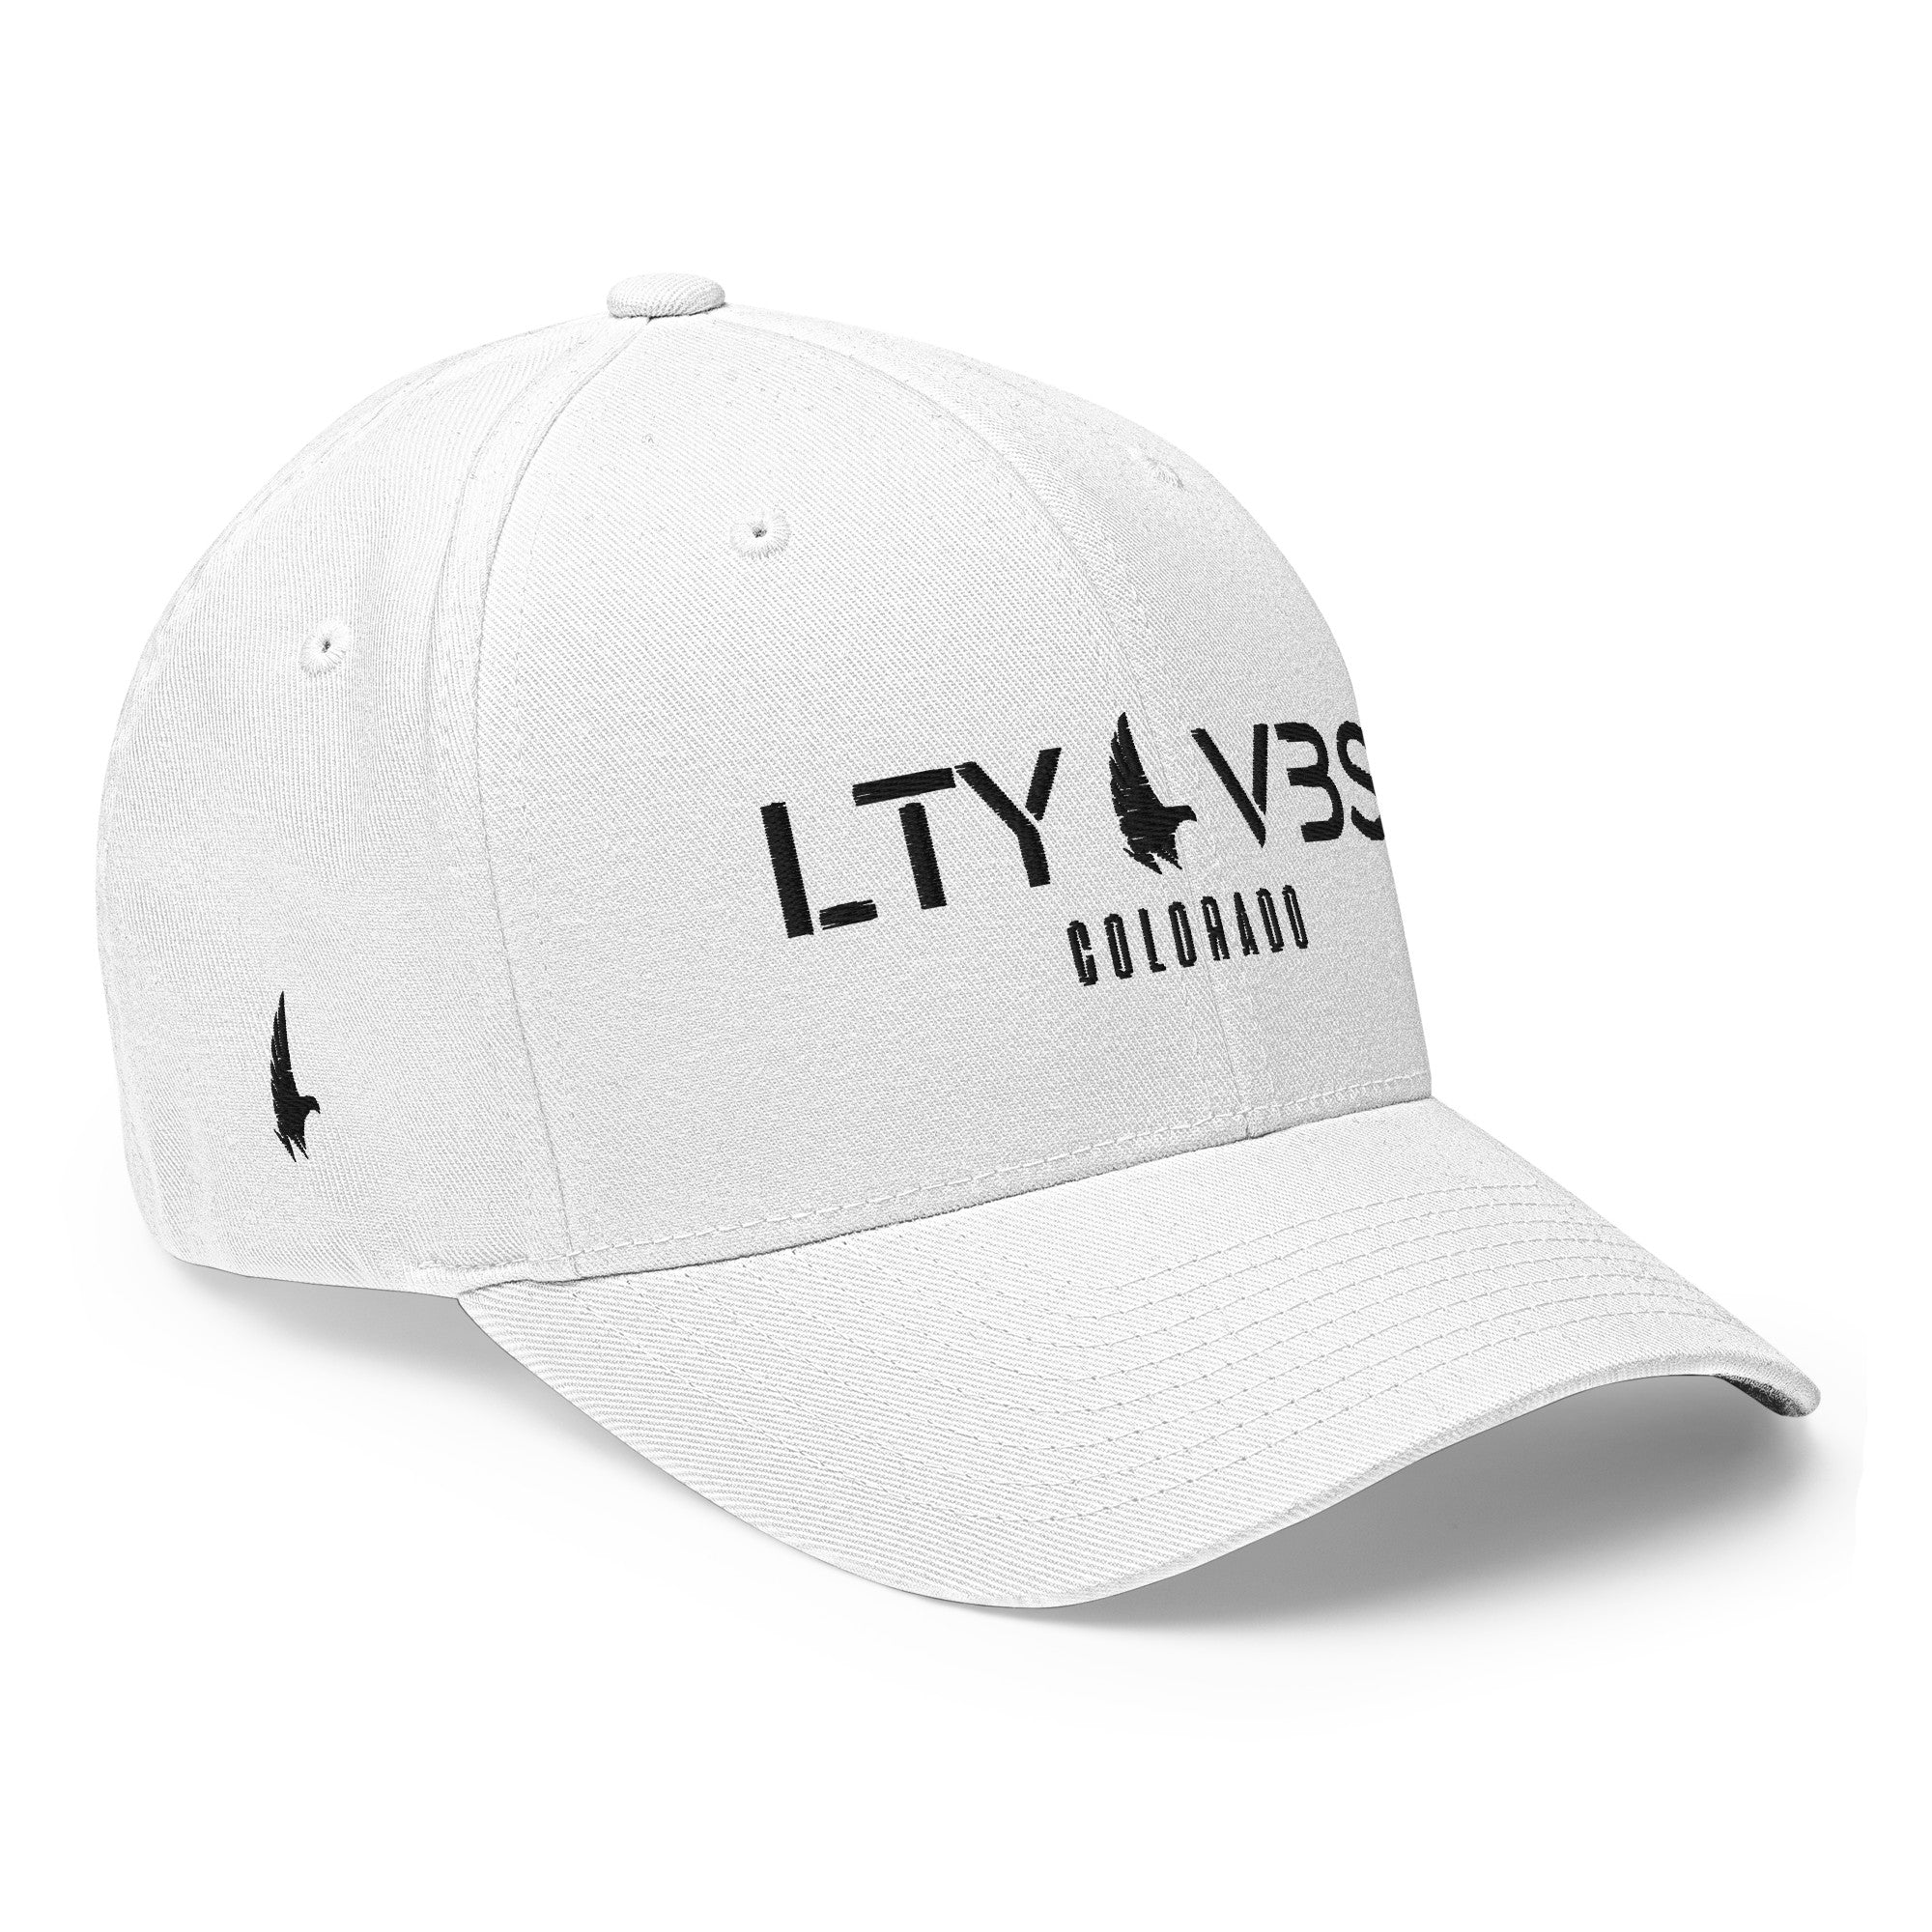 Loyalty Era Colorado Fitted Hat - Loyalty Vibes